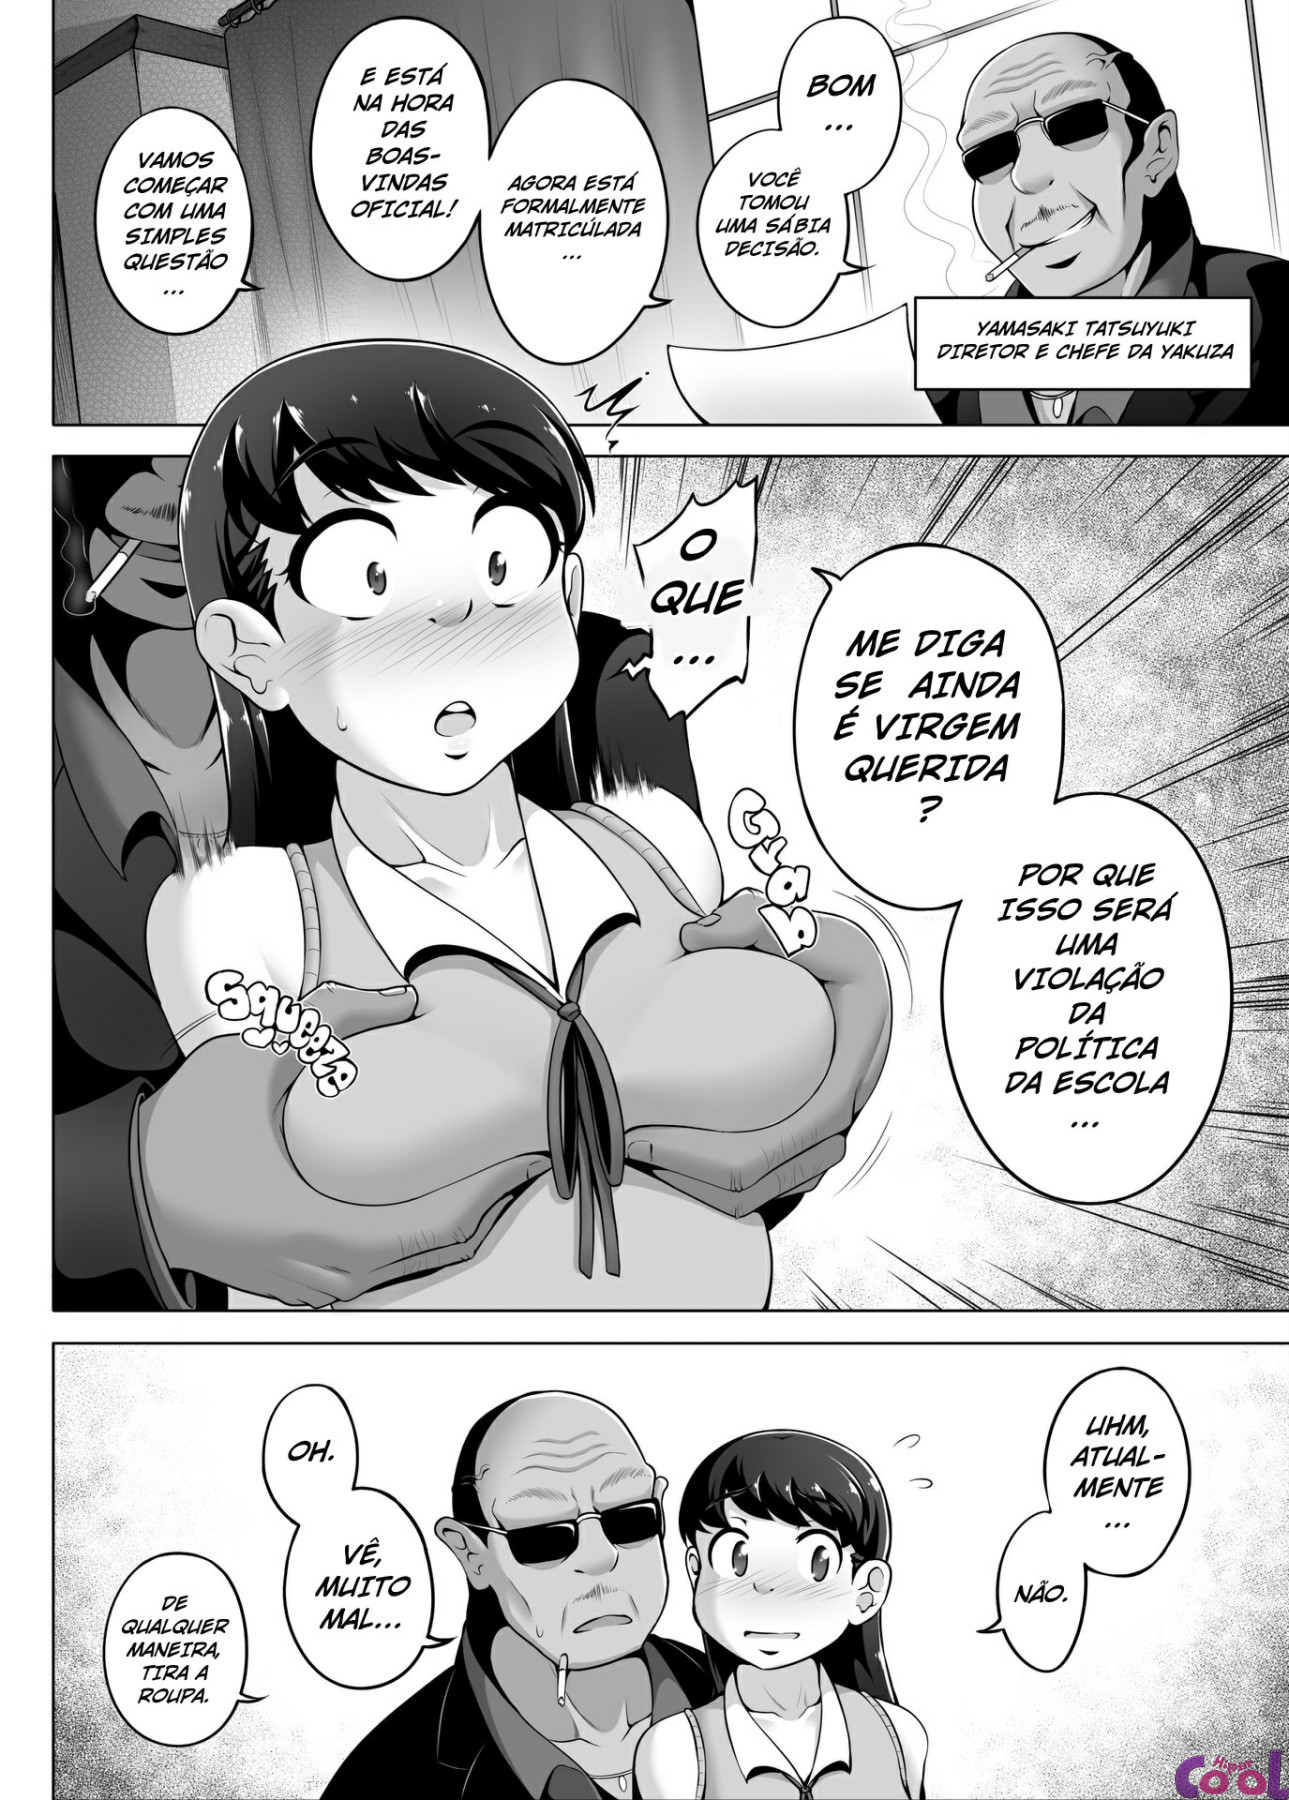 red-light-academy-chapter-02-page-02.jpg